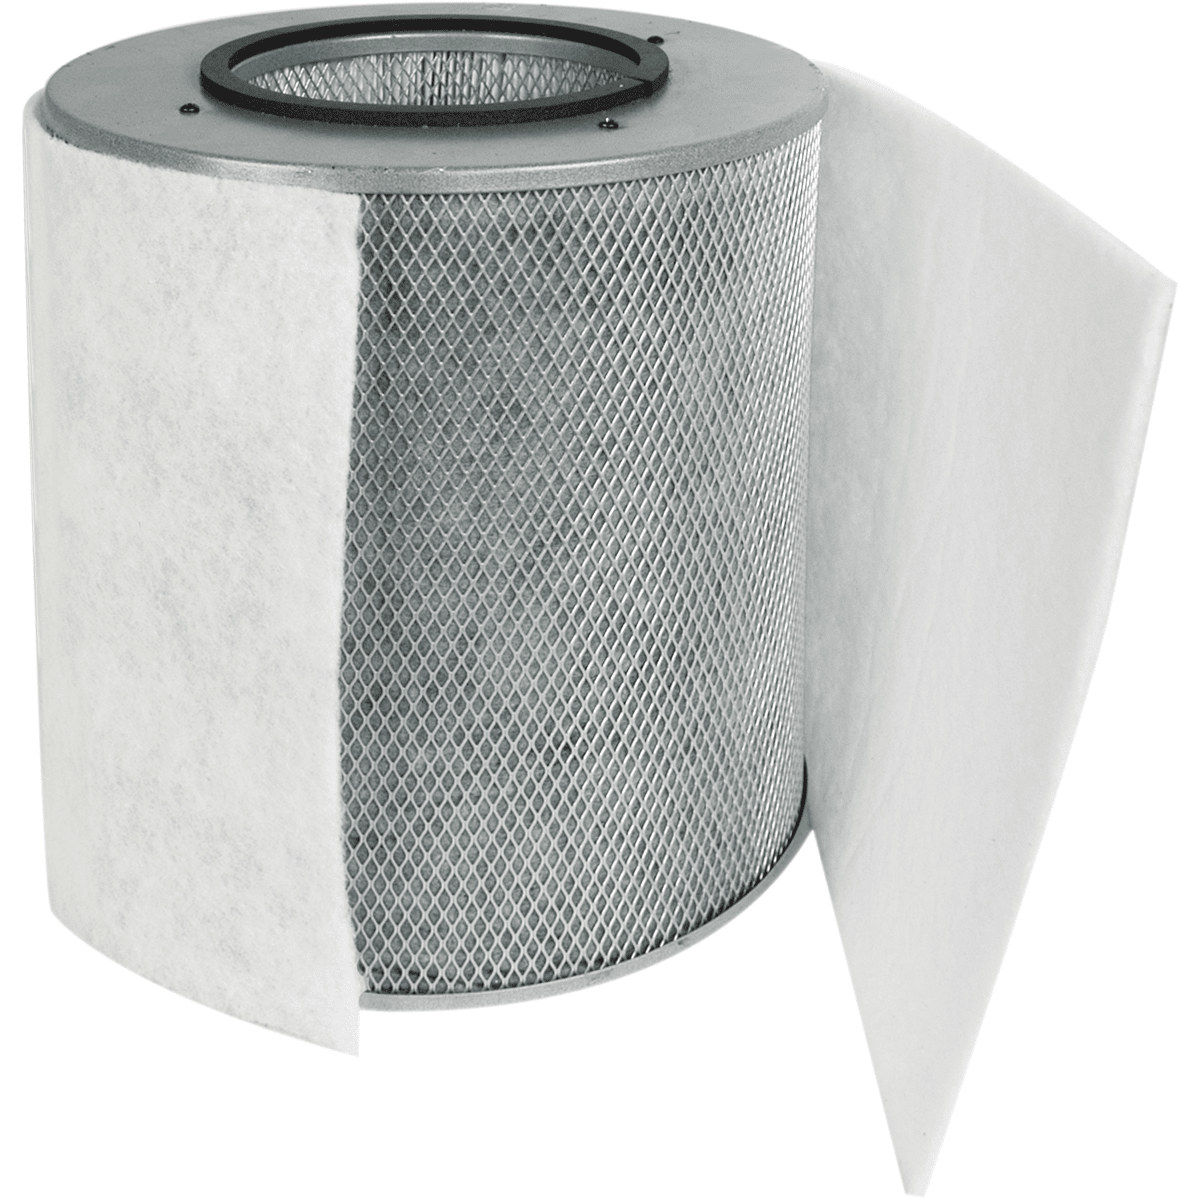 Austin Air Healthmate Replacement Filter w/ Prefilter (Light-colored)